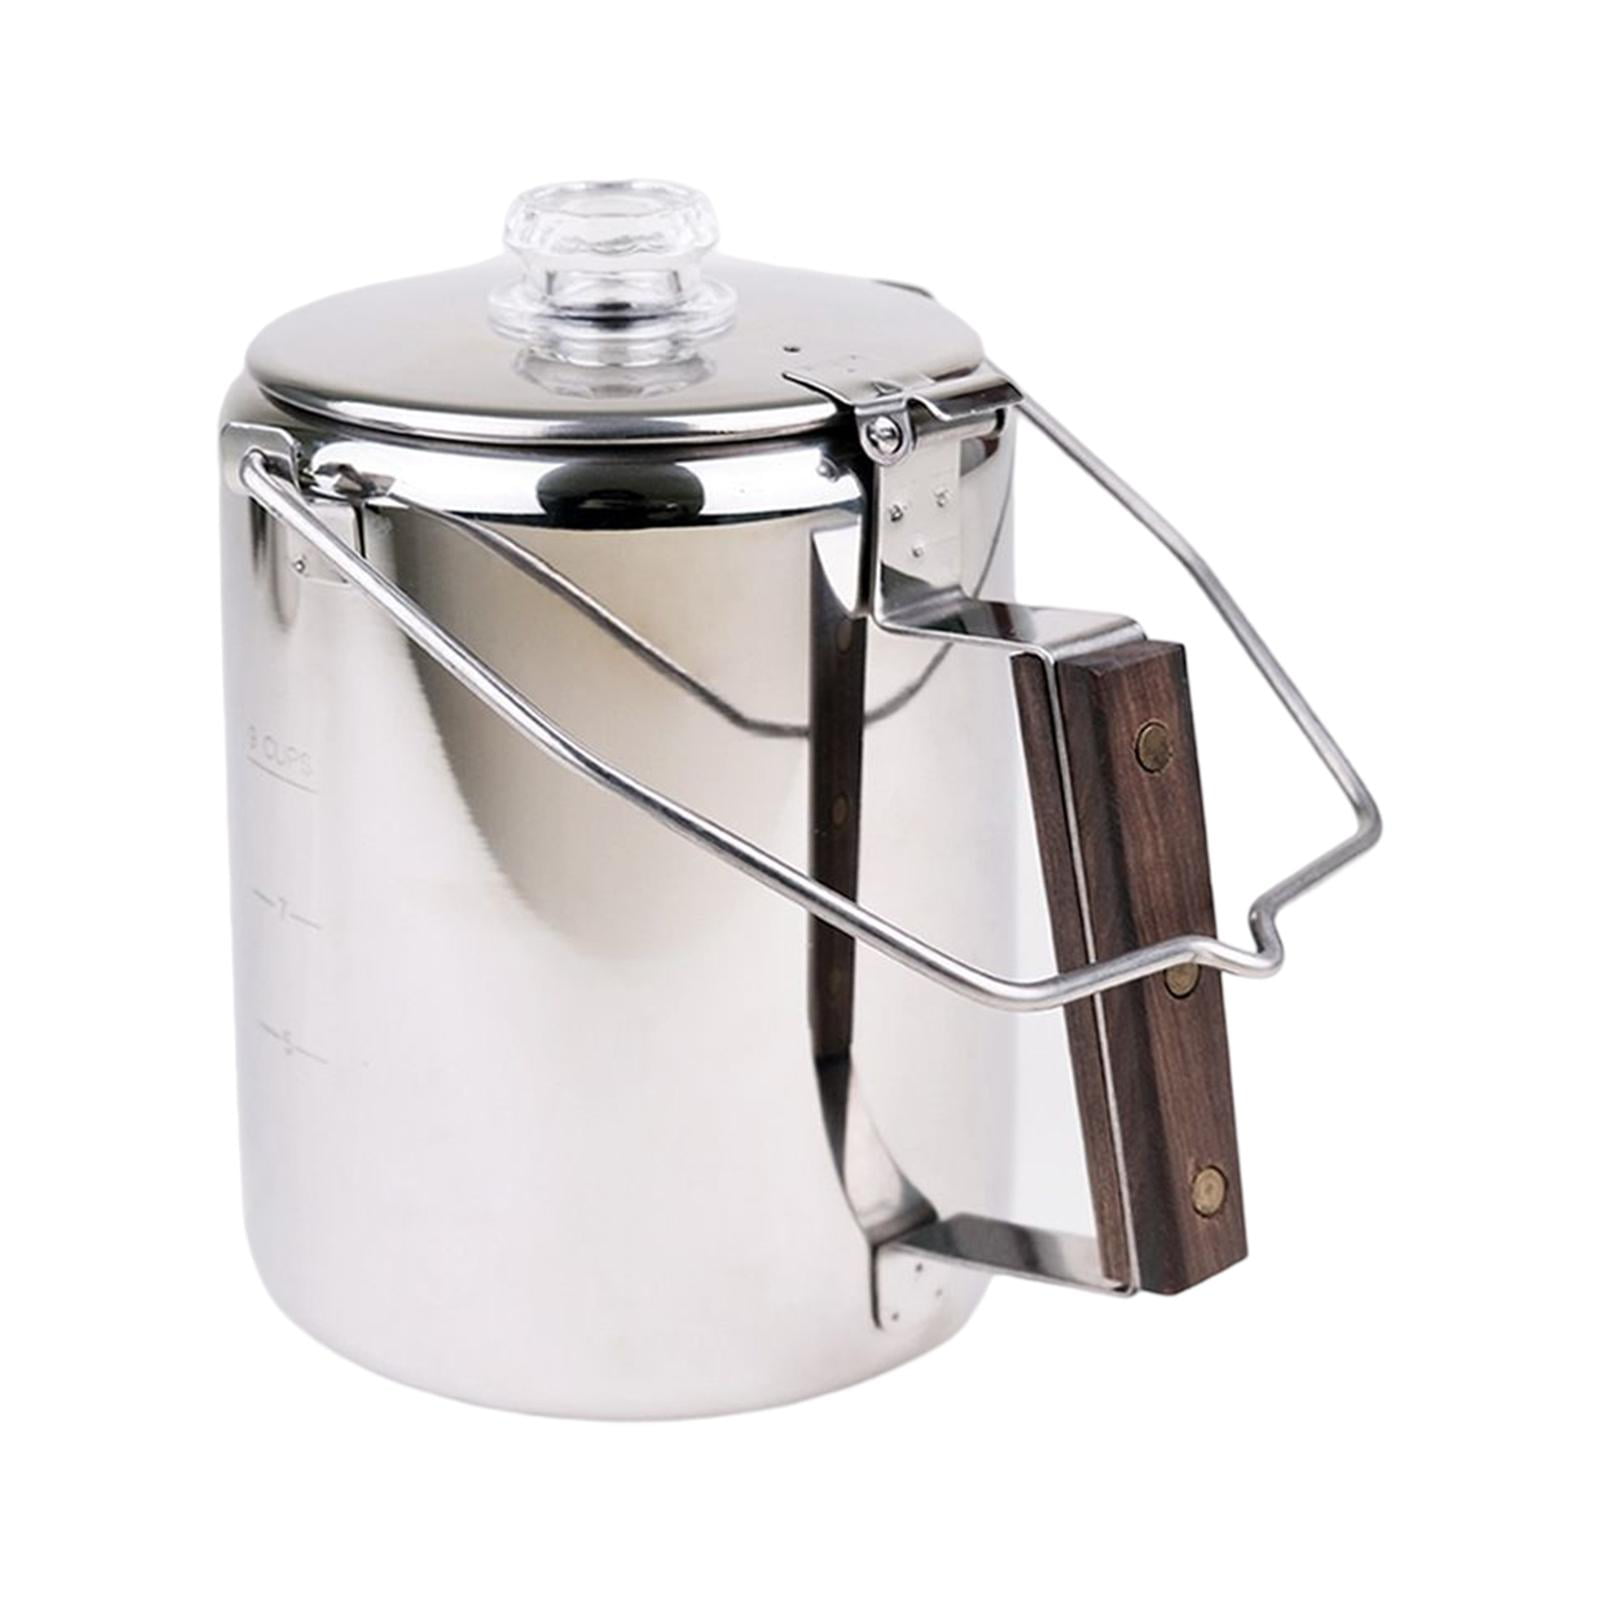 APOXCON Coffee Percolator Stainless Steel Camping Percolator Coffee Pot  with Glass Knob Top, Durable Coffee Maker for Campfire or Stovetop Coffee